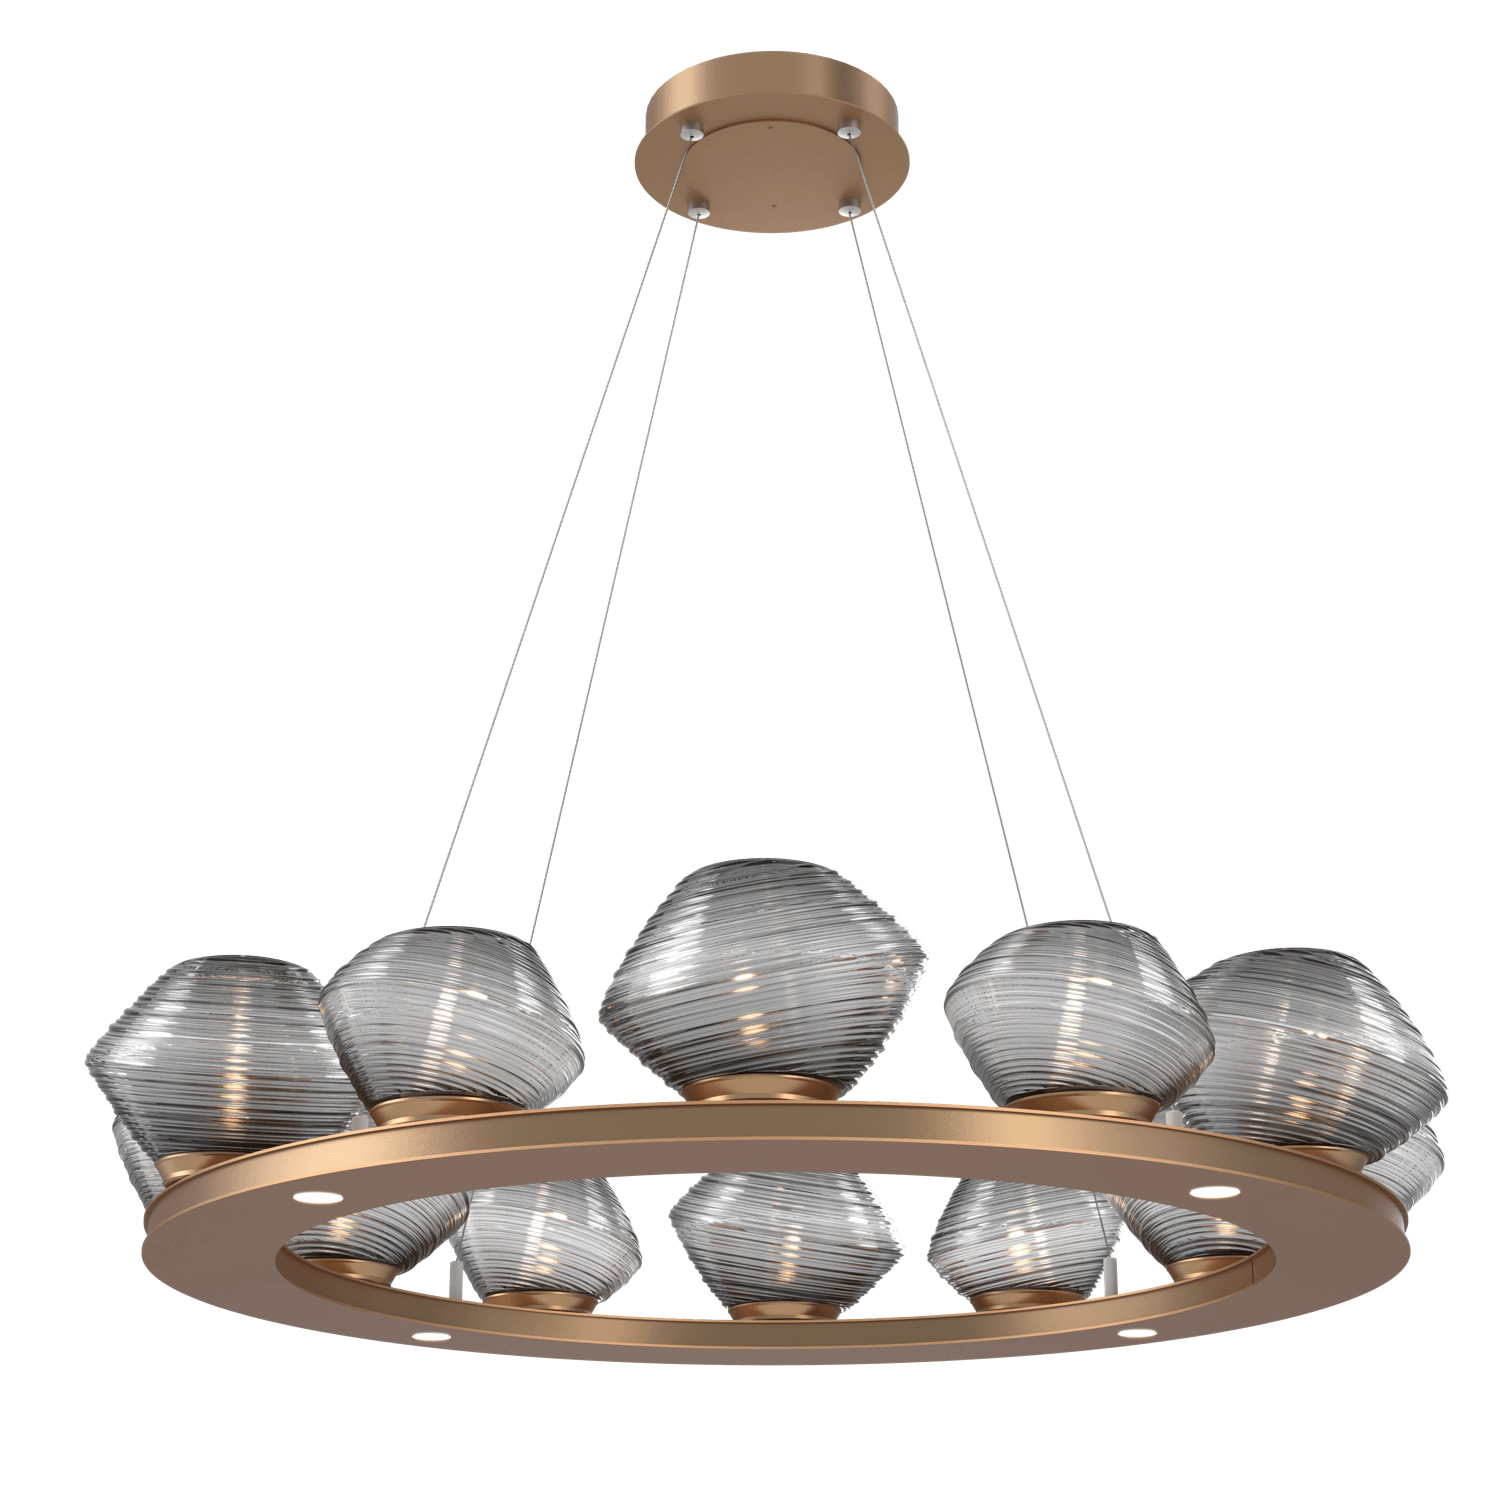 CHB0089-0C-NB-S-Hammerton-Studio-Mesa-36-inch-ring-chandelier-with-novel-brass-finish-and-smoke-blown-glass-shades-and-LED-lamping